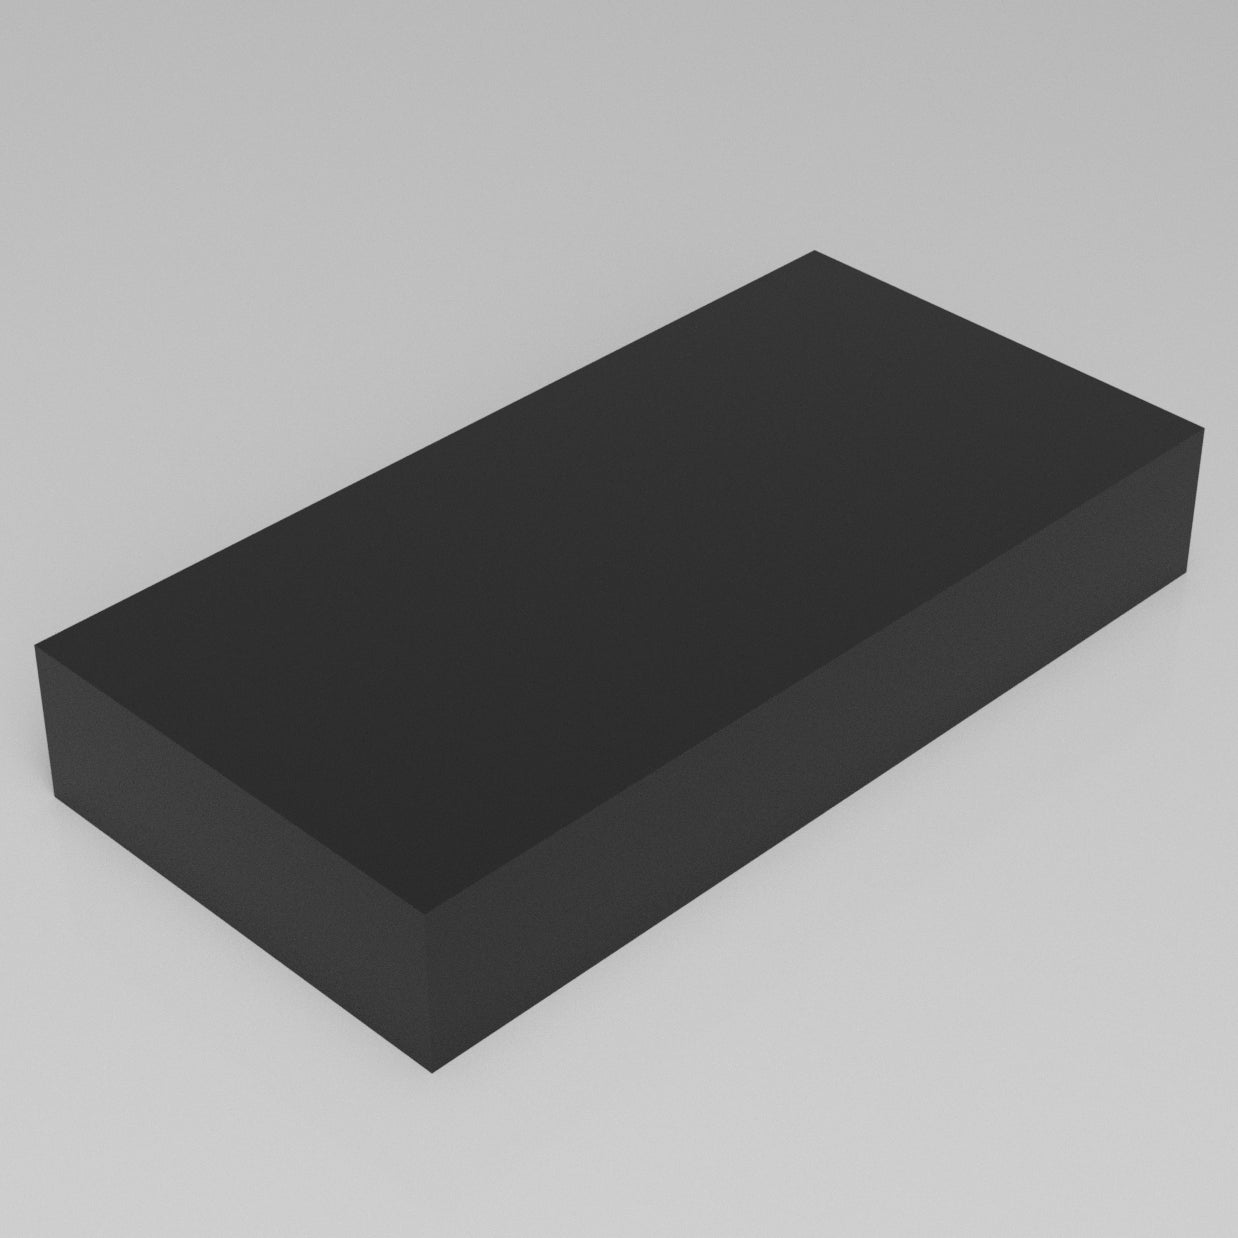 Machinable Wax Rectangular Block Front View 4 Inch by 12 Inch by 24 Inch